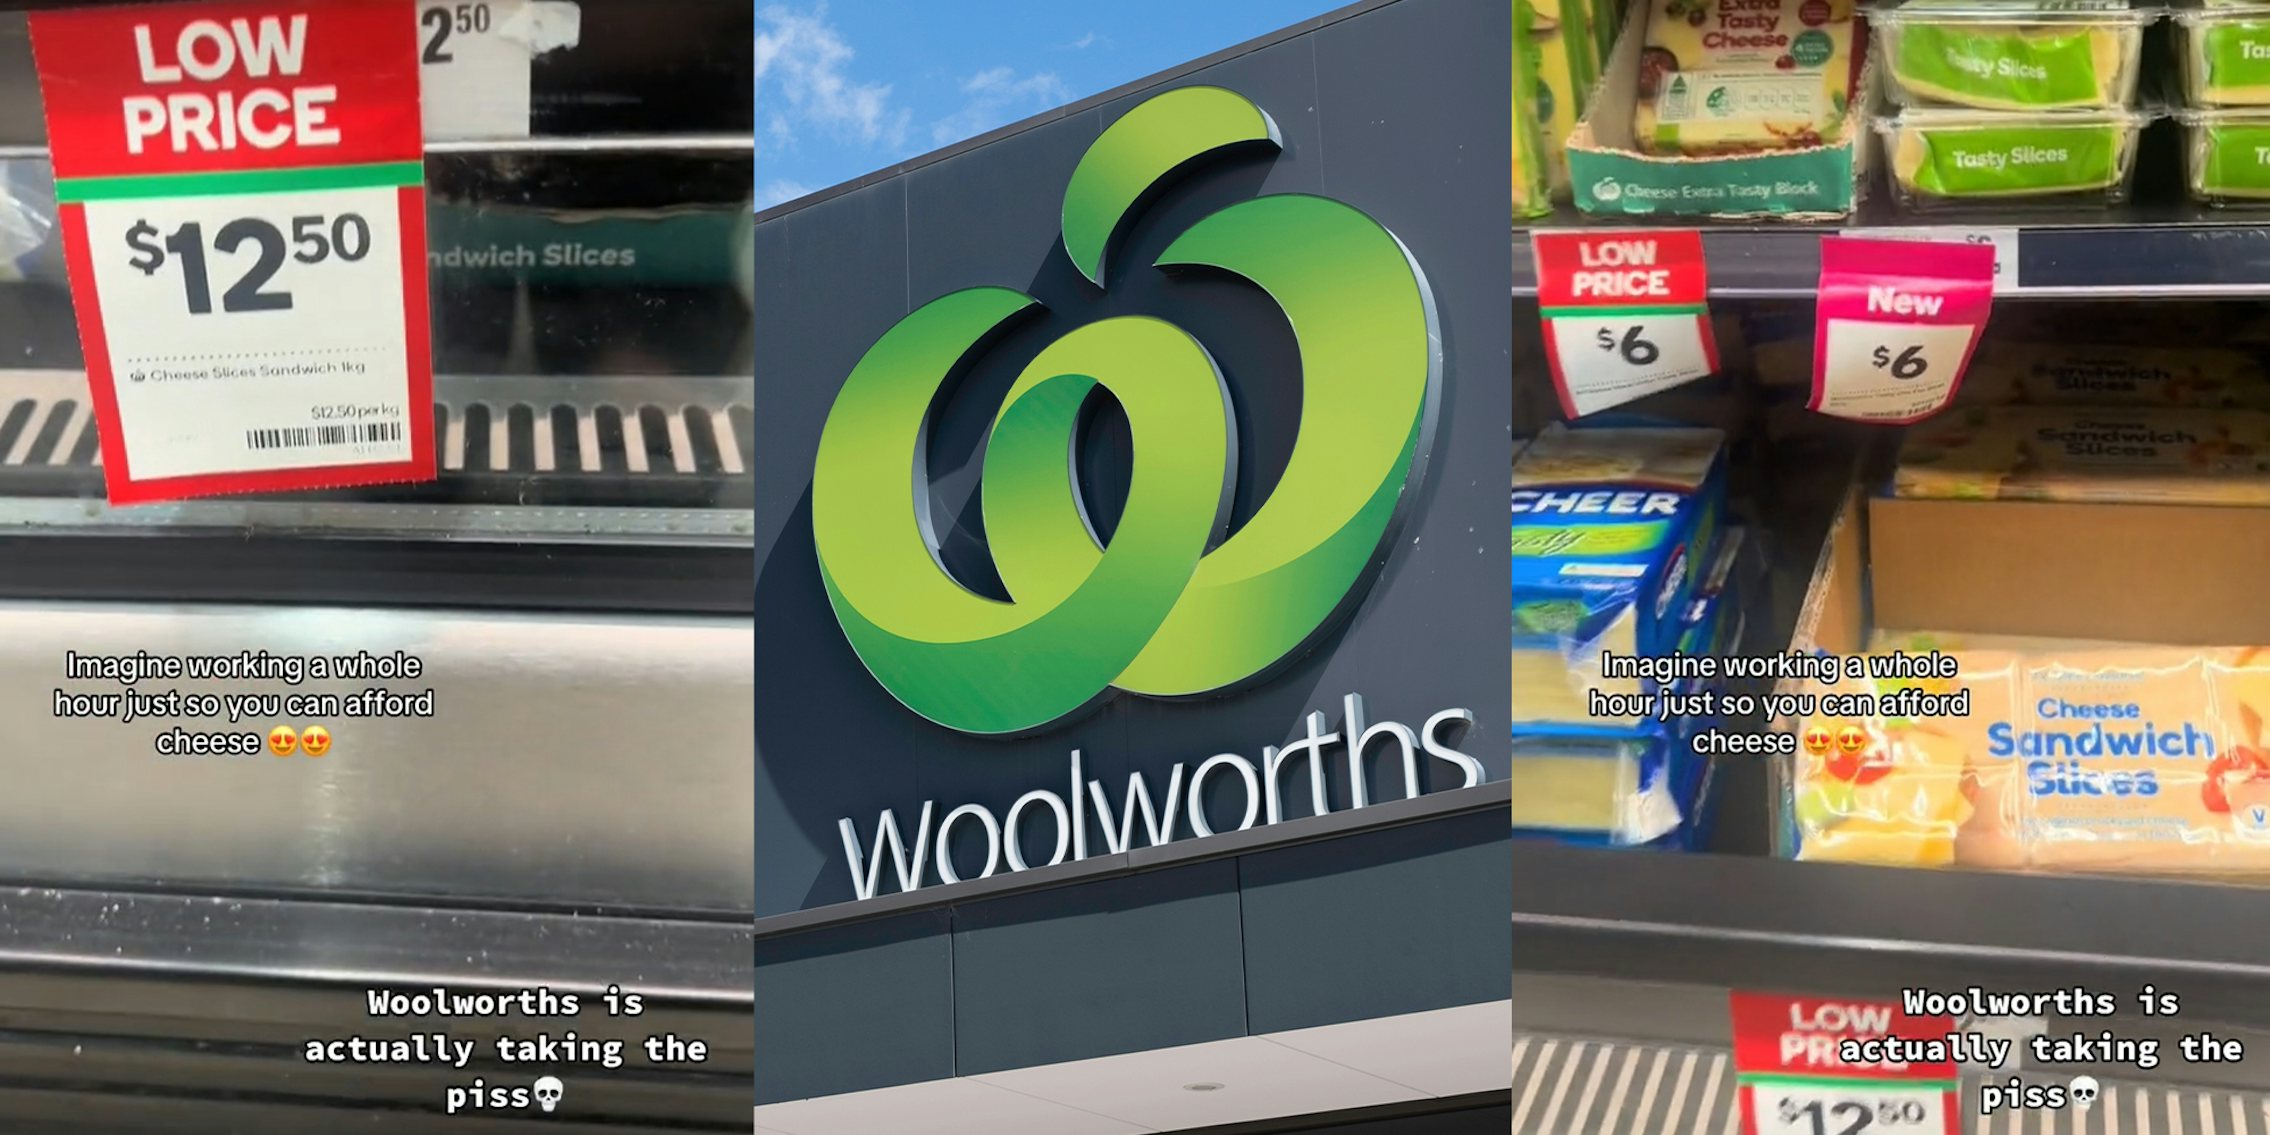 Woolworths Supermarket customer says cost of cheese is equivalent to 1 hour of work